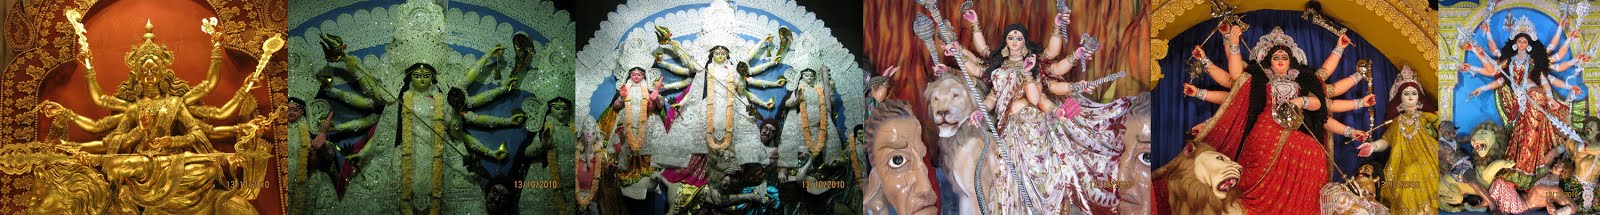 Welcome to the Website of Goddess Durga